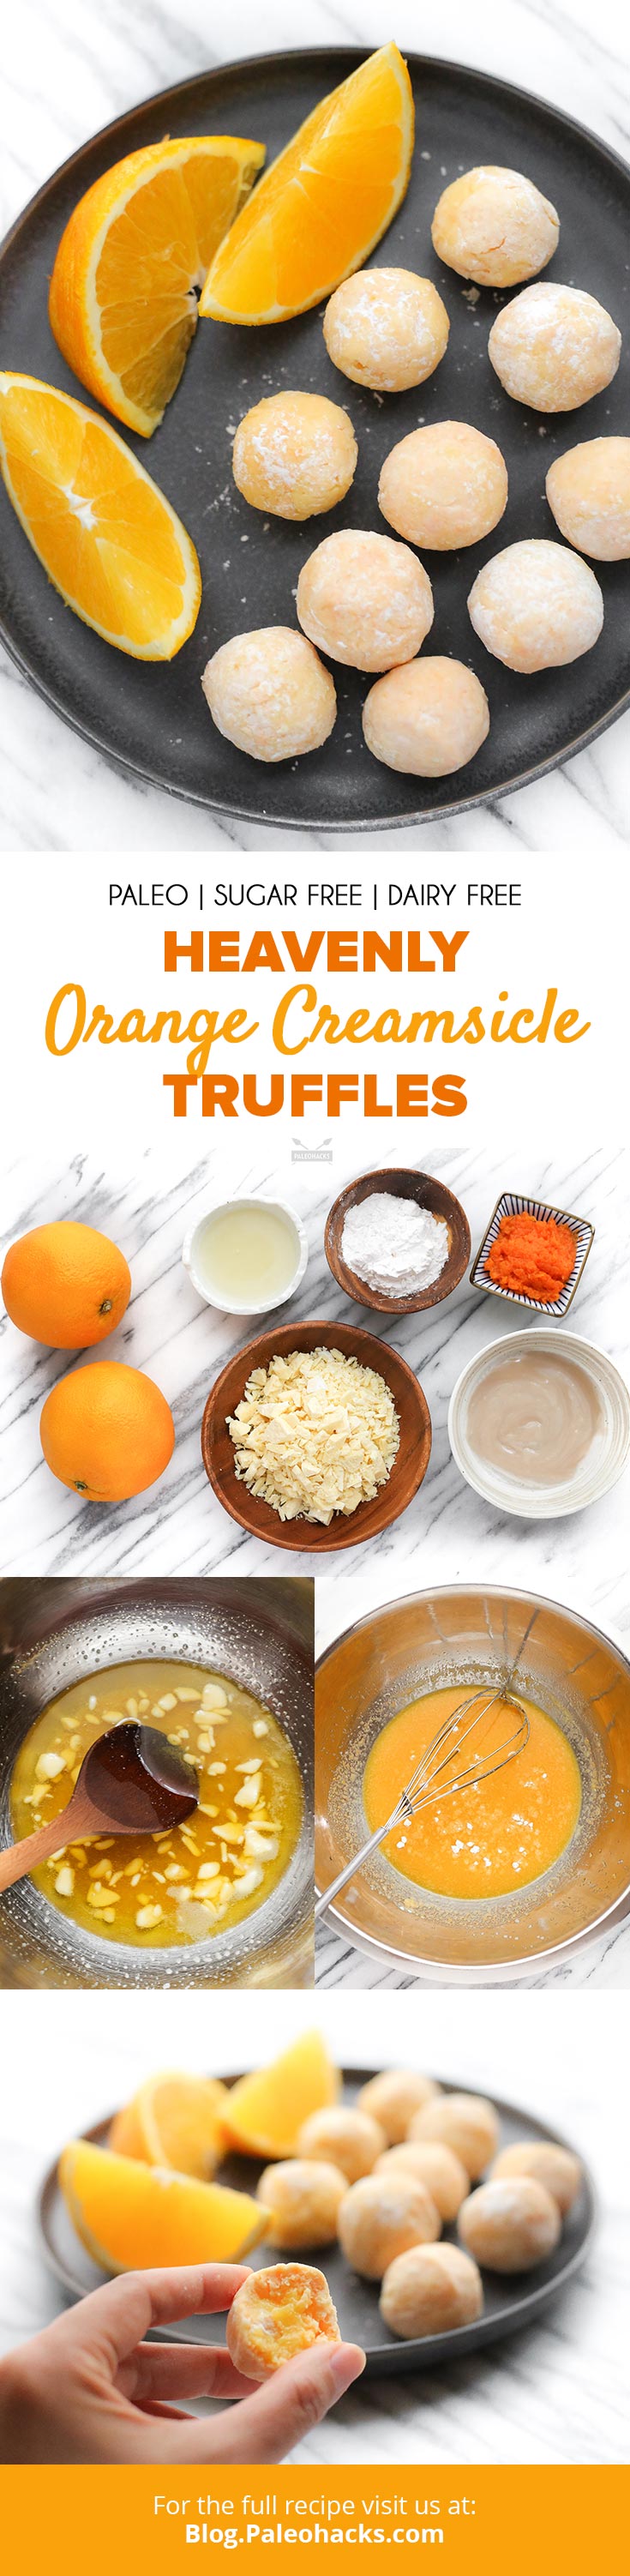 Enjoy a burst of creamy citrus bliss in one big beautiful bite. Made with a creamy filling and zesty oranges, these truffles are melt-in-your-mouth delicious.